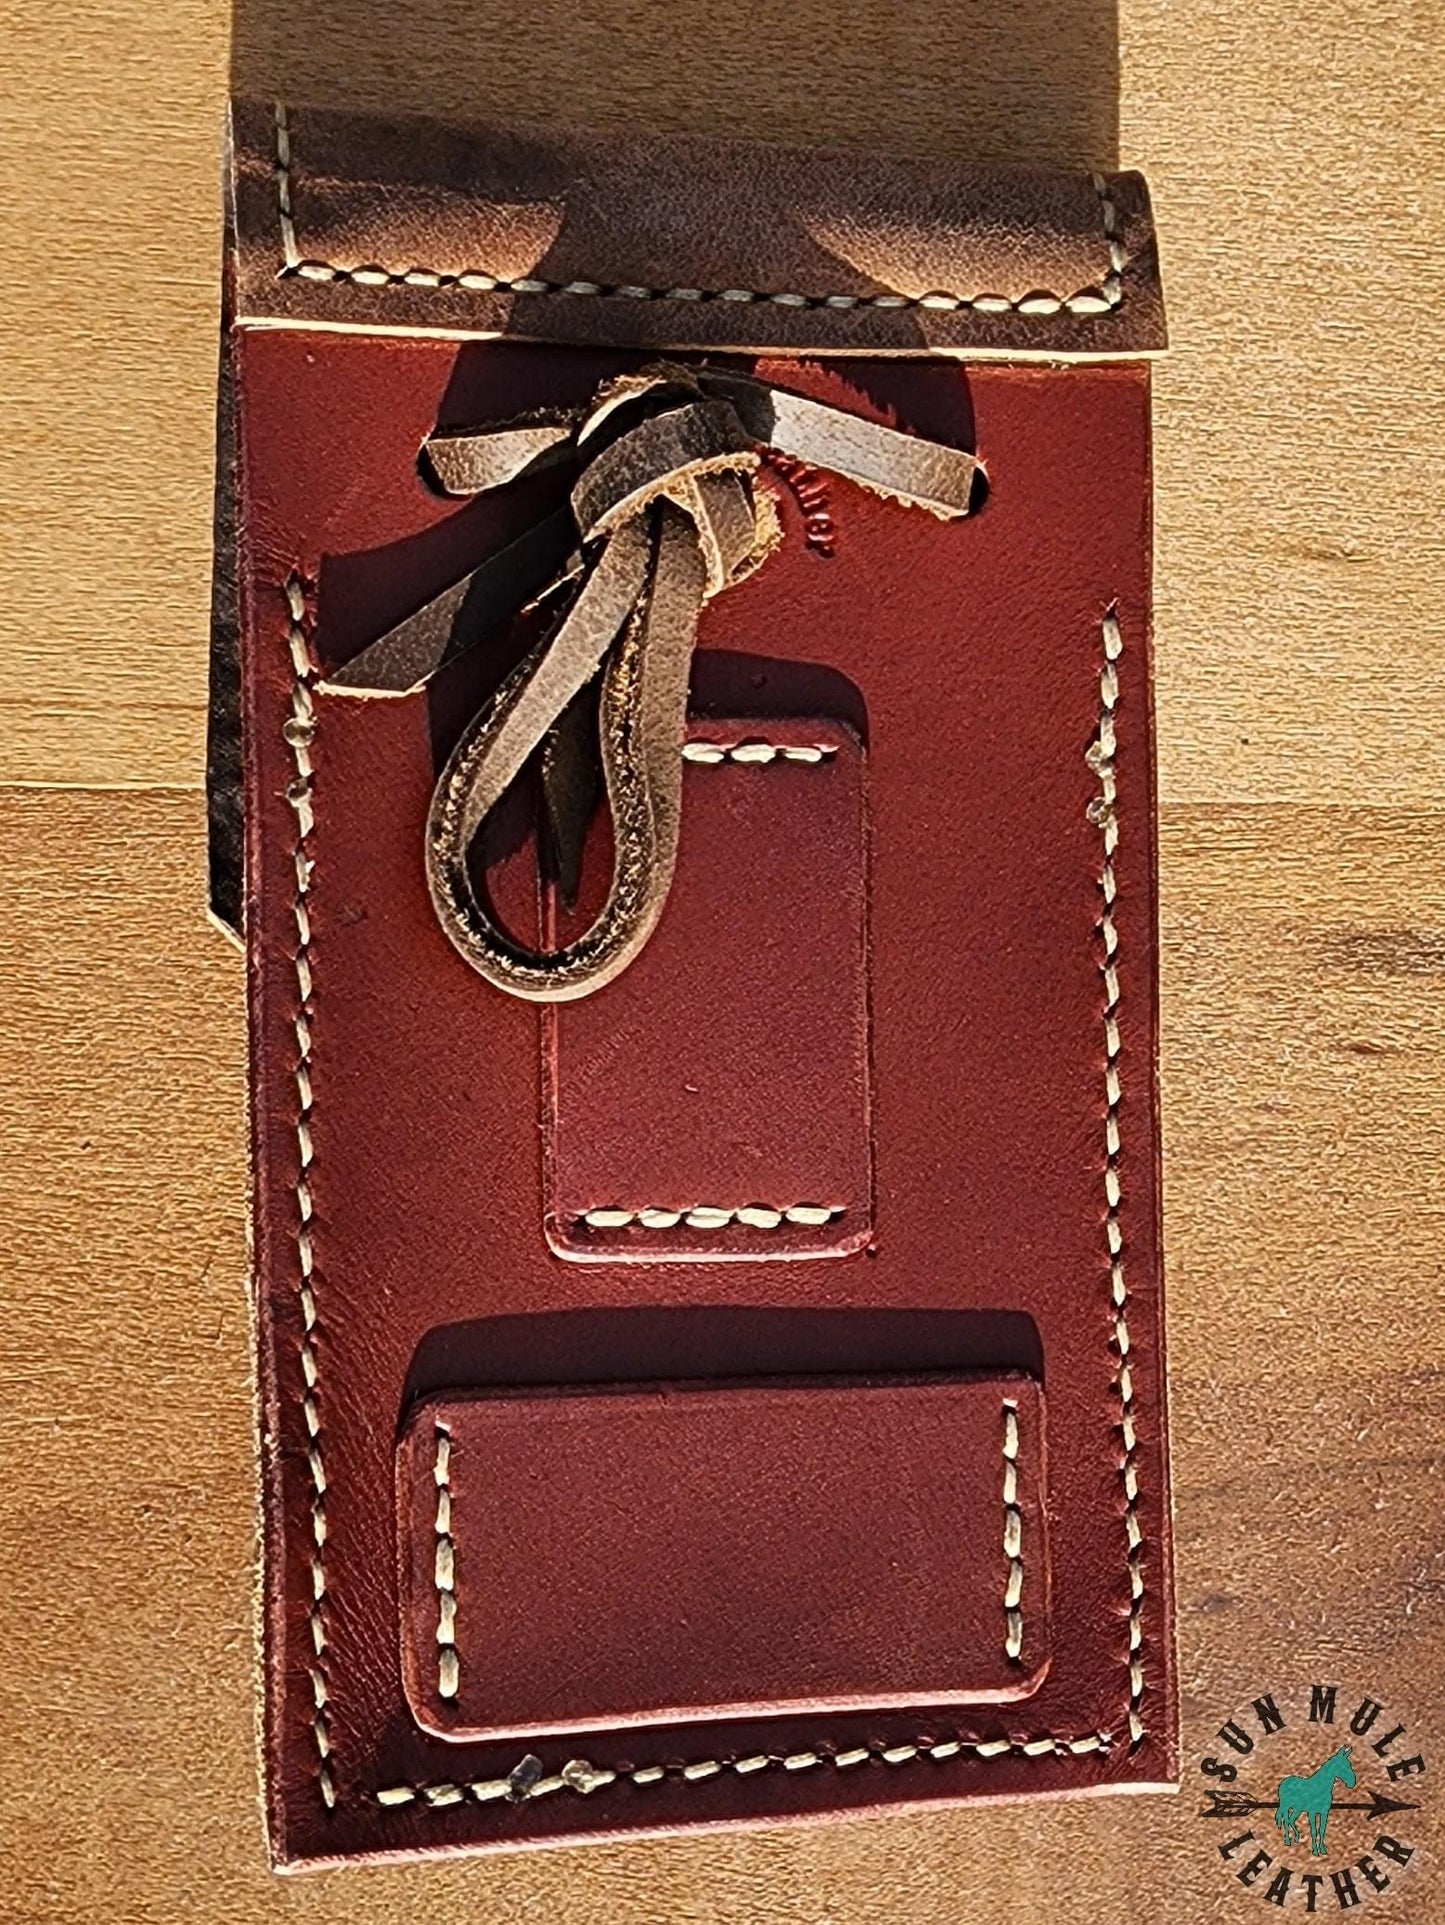 Phone holder pouch for saddle or belt with mule concho